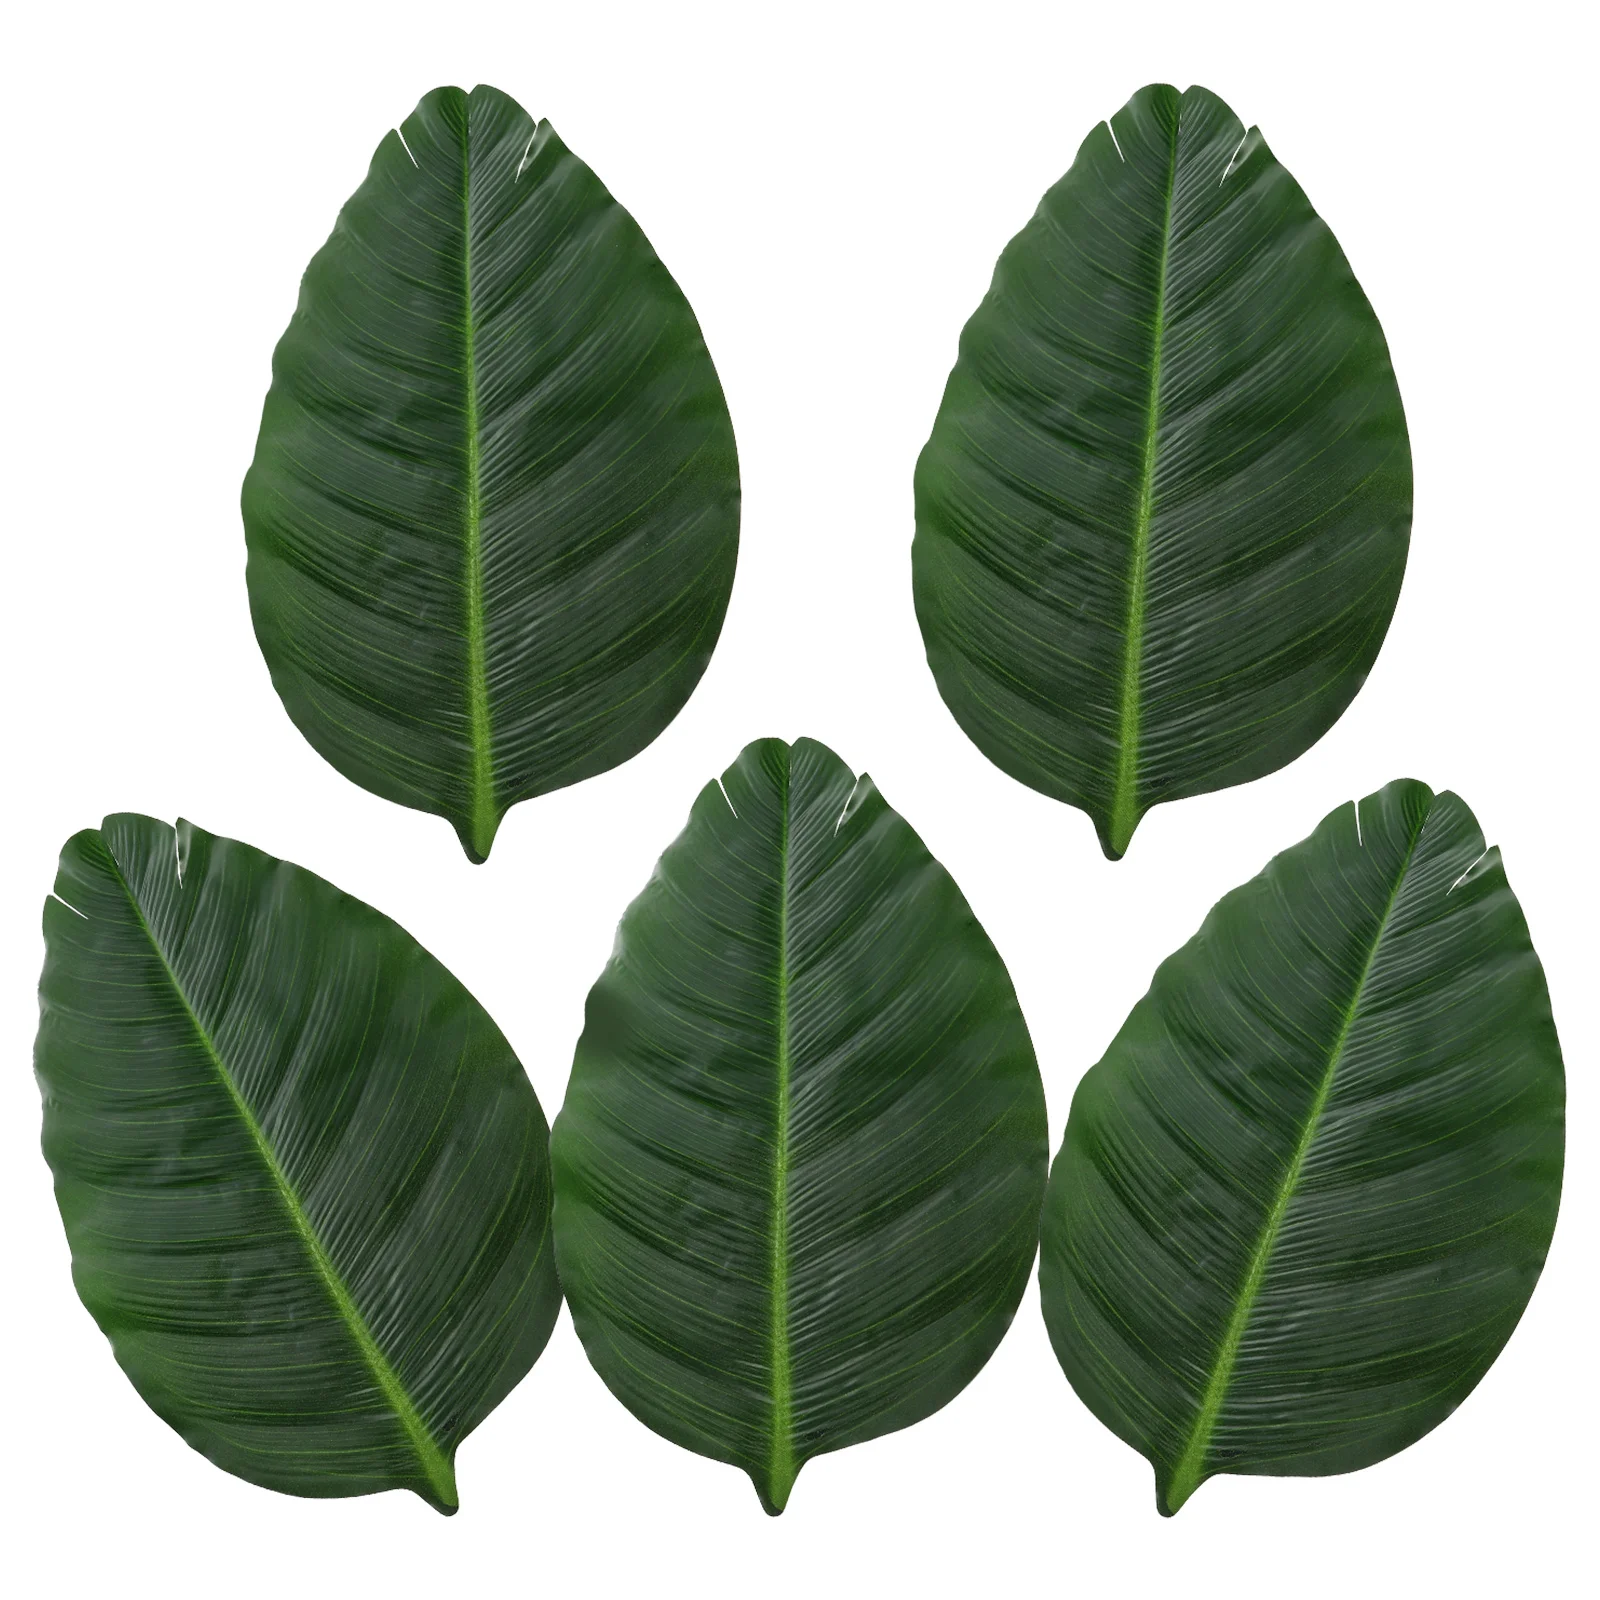 

Leaf Leaves Placemats Coasters Coaster Tropical Party Green Palm Cup Table Mats Mat Placemat Decoration Luau Hawaii Faux